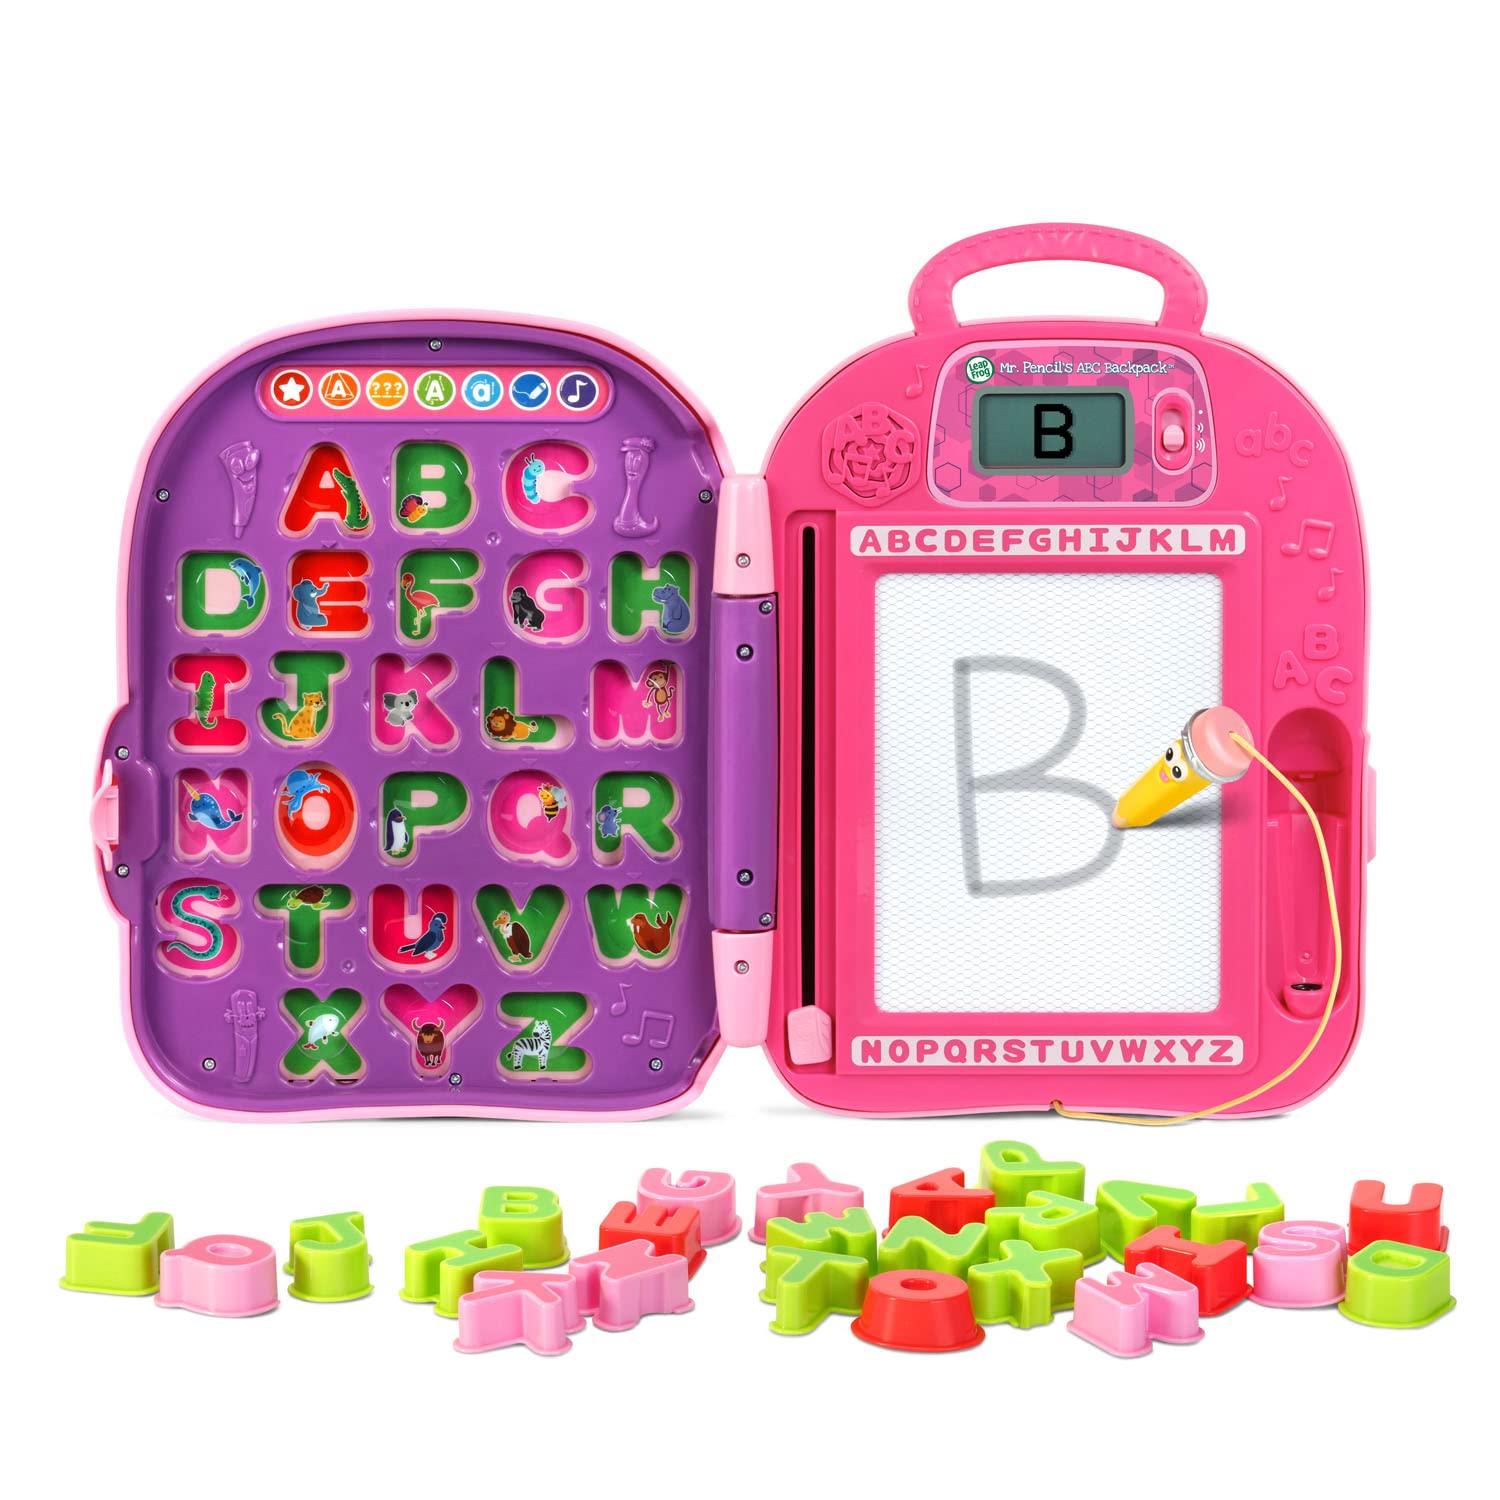 LeapFrog Mr. Pencil's ABC Backpack, Pink